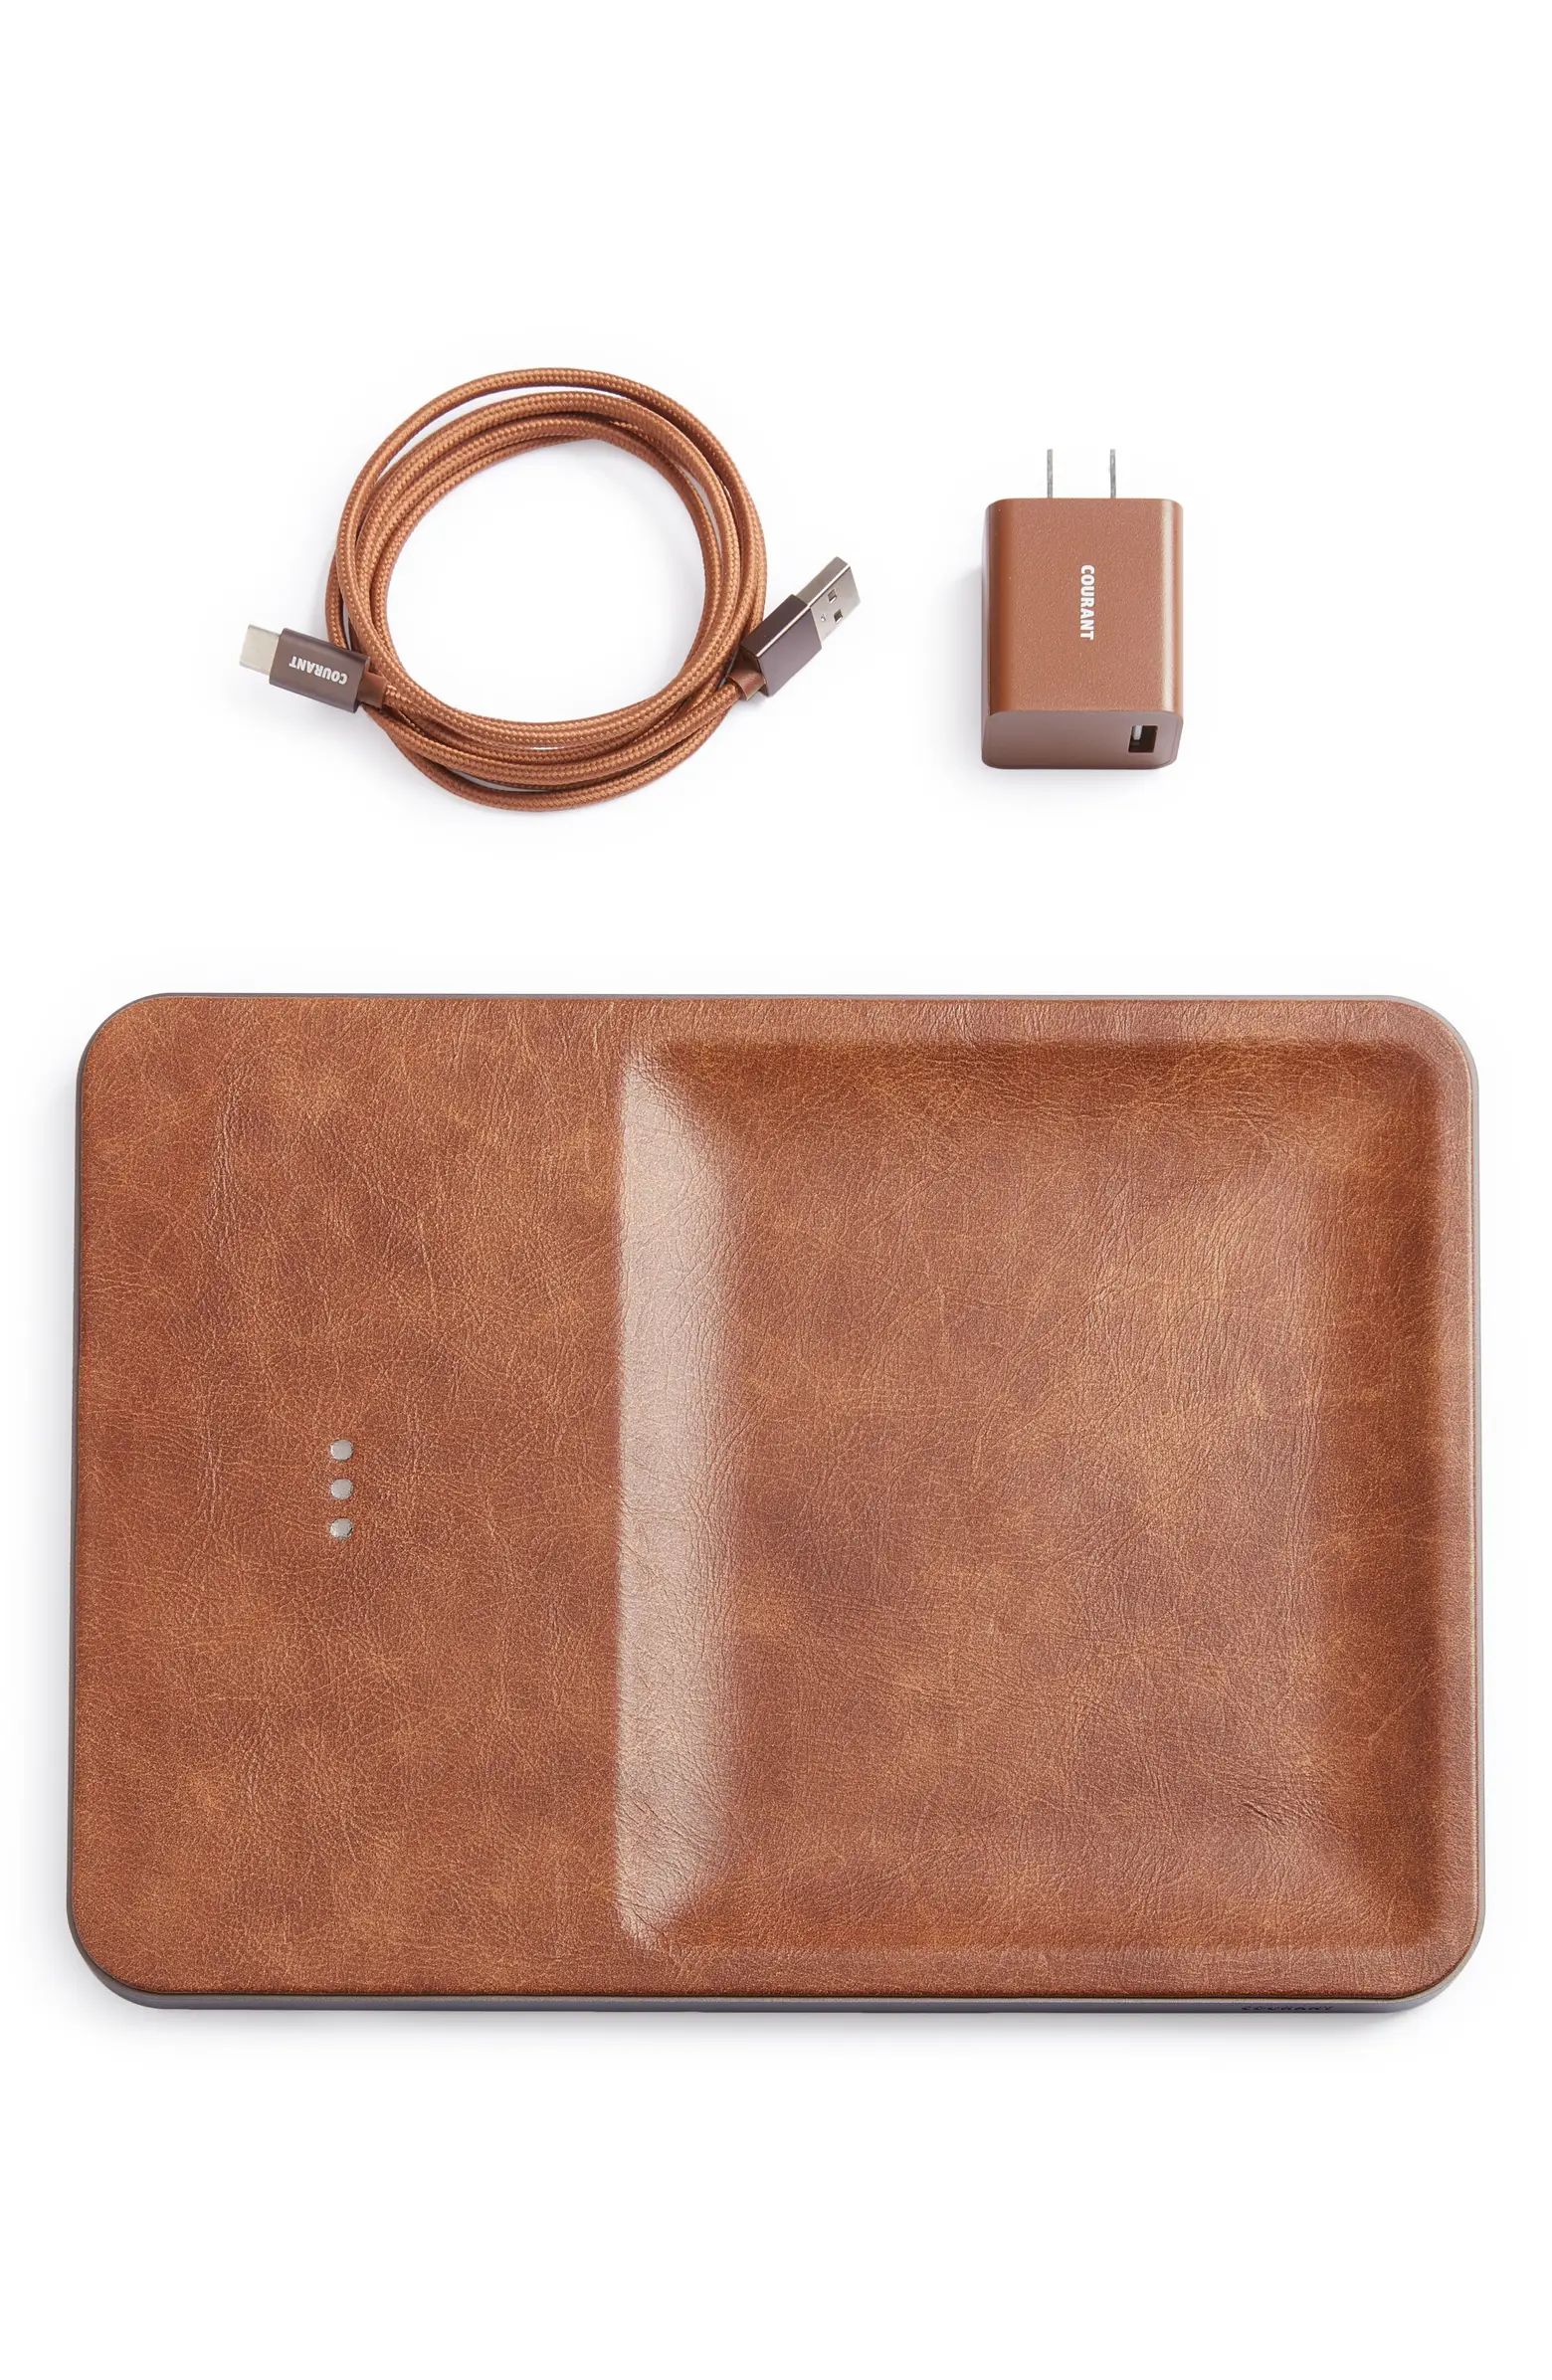 Catch 3 Charging Pad | Nordstrom